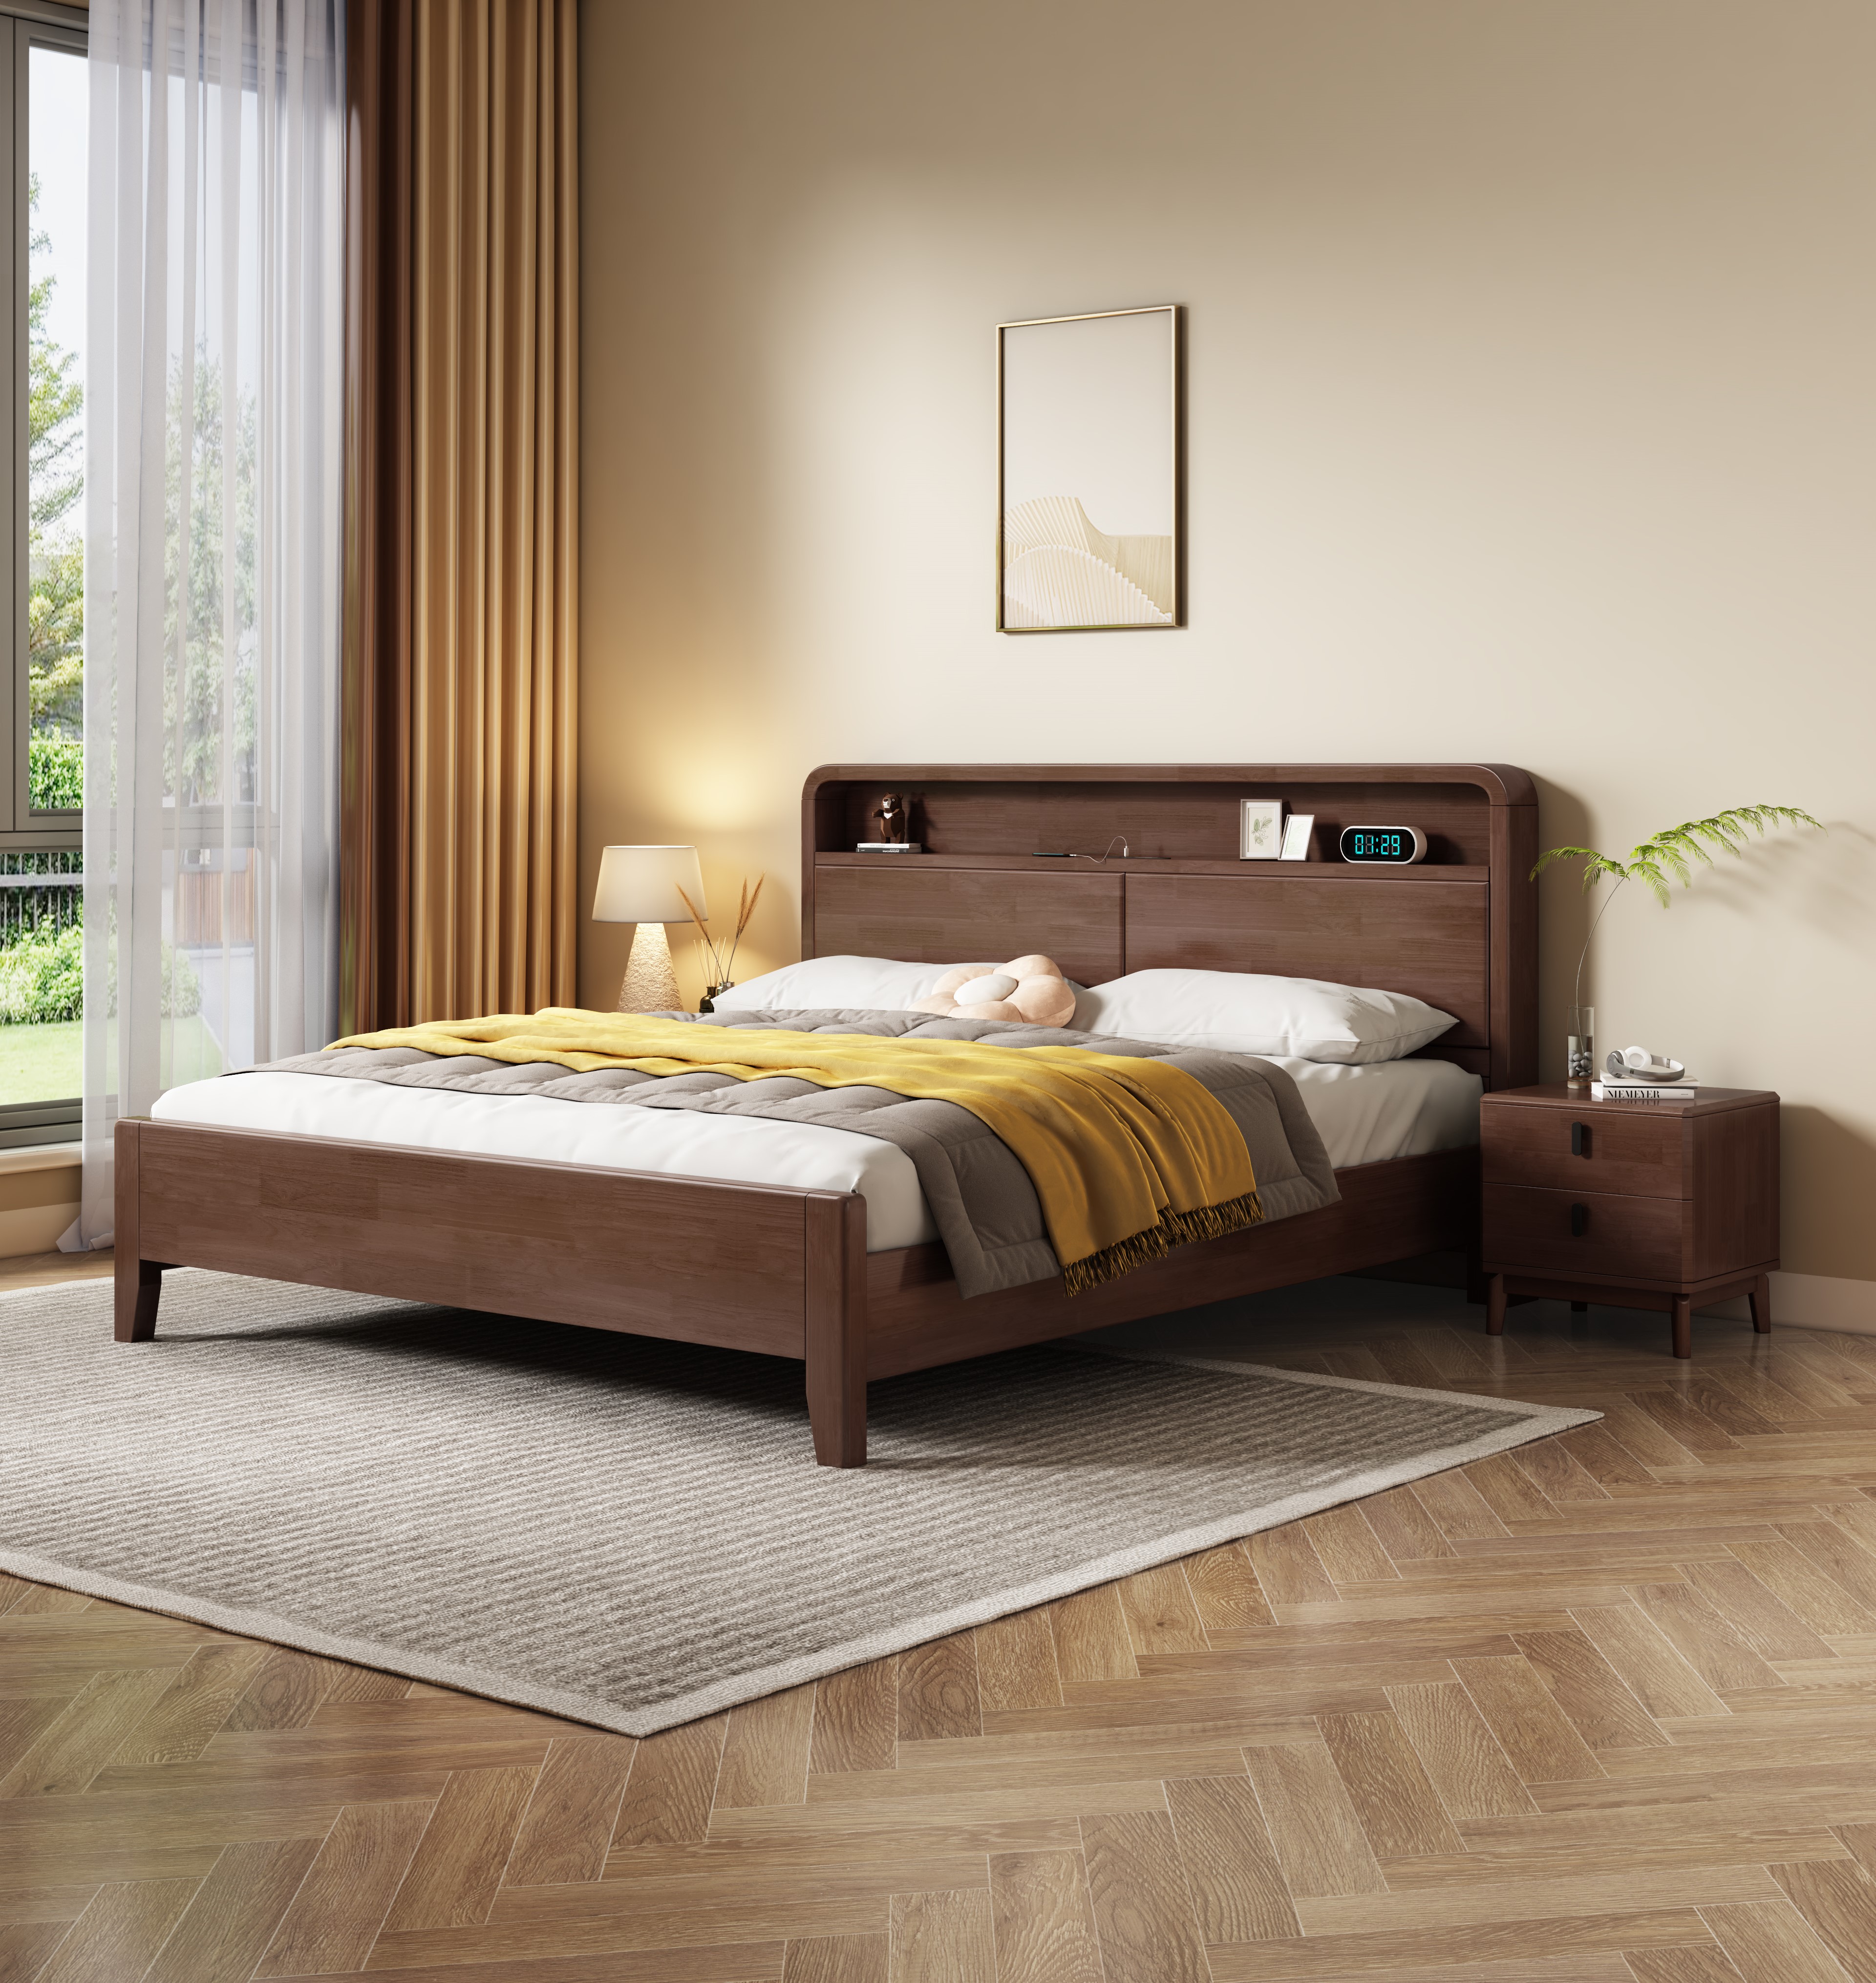 King bed #1655D